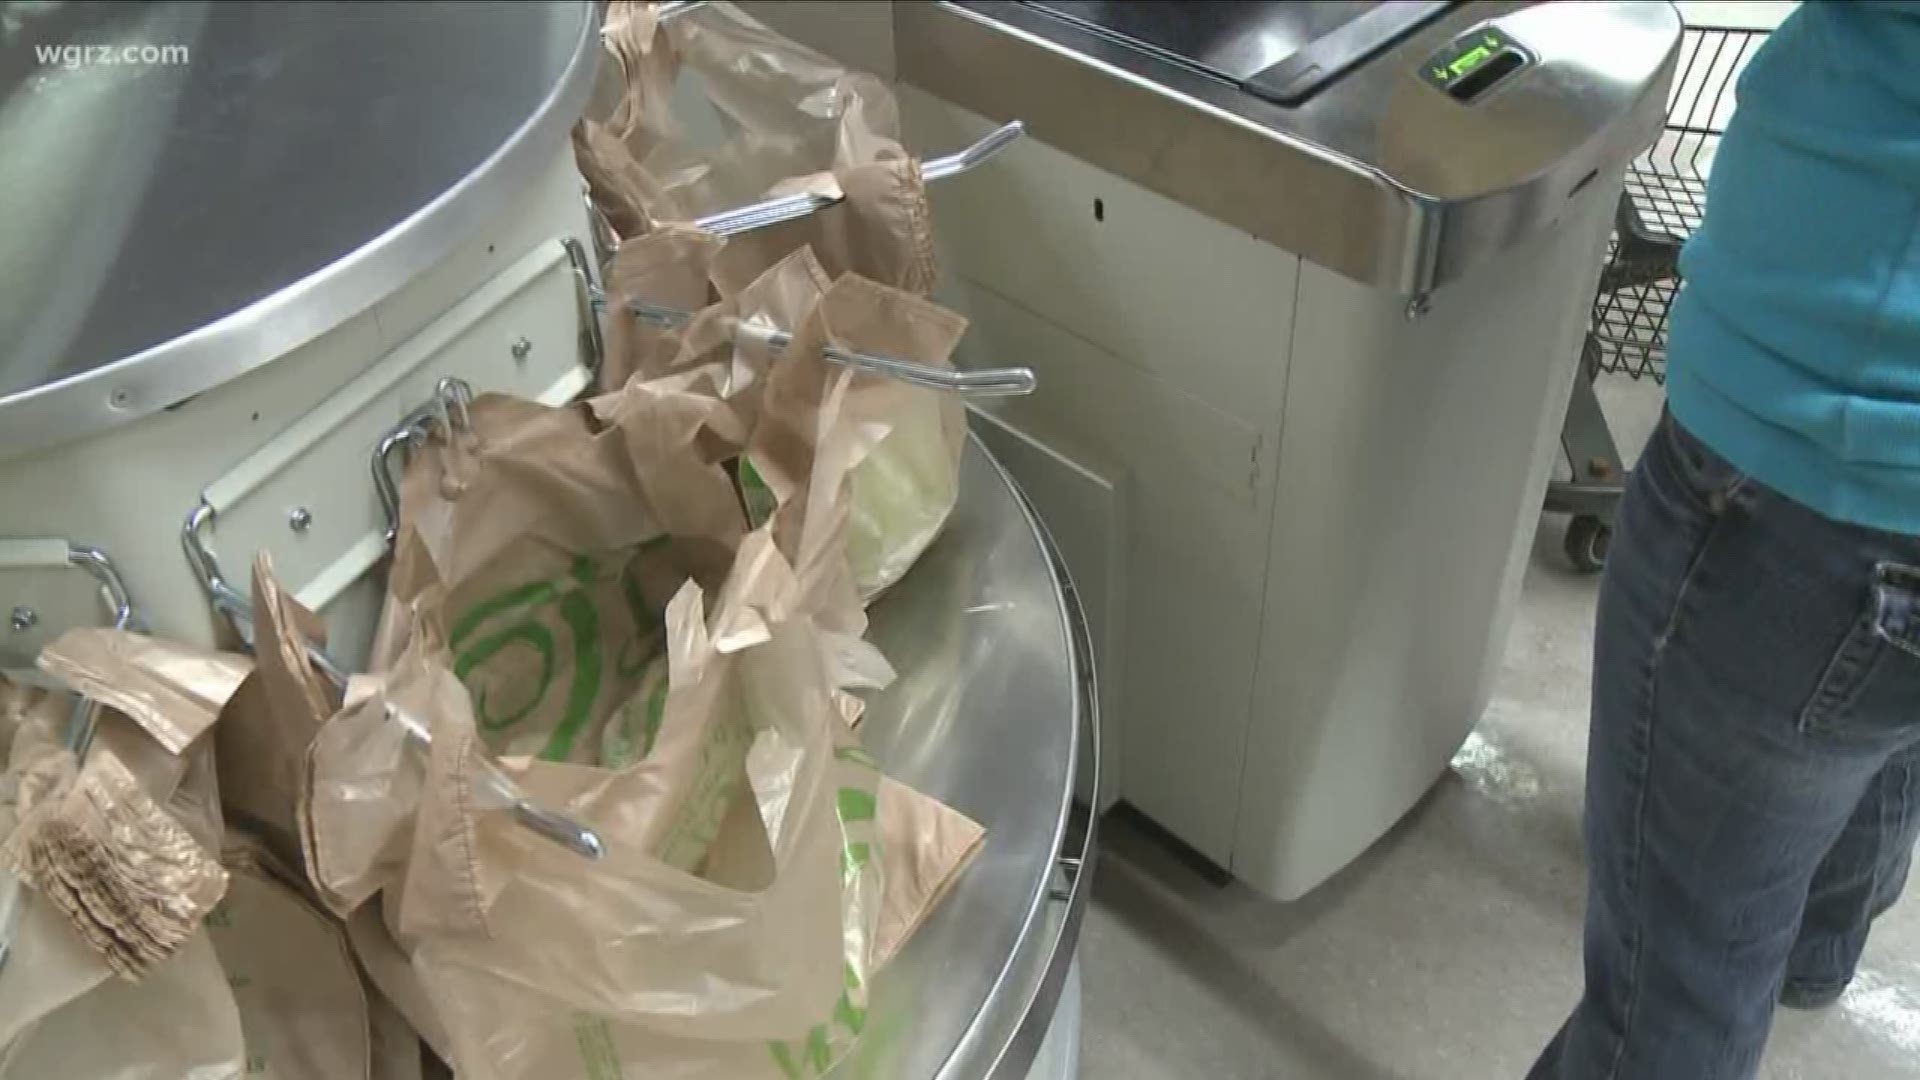 One of the most common questions we've gotten from people is: "What's going to happen after Wegman's gets rid of plastic bags six days from now?"